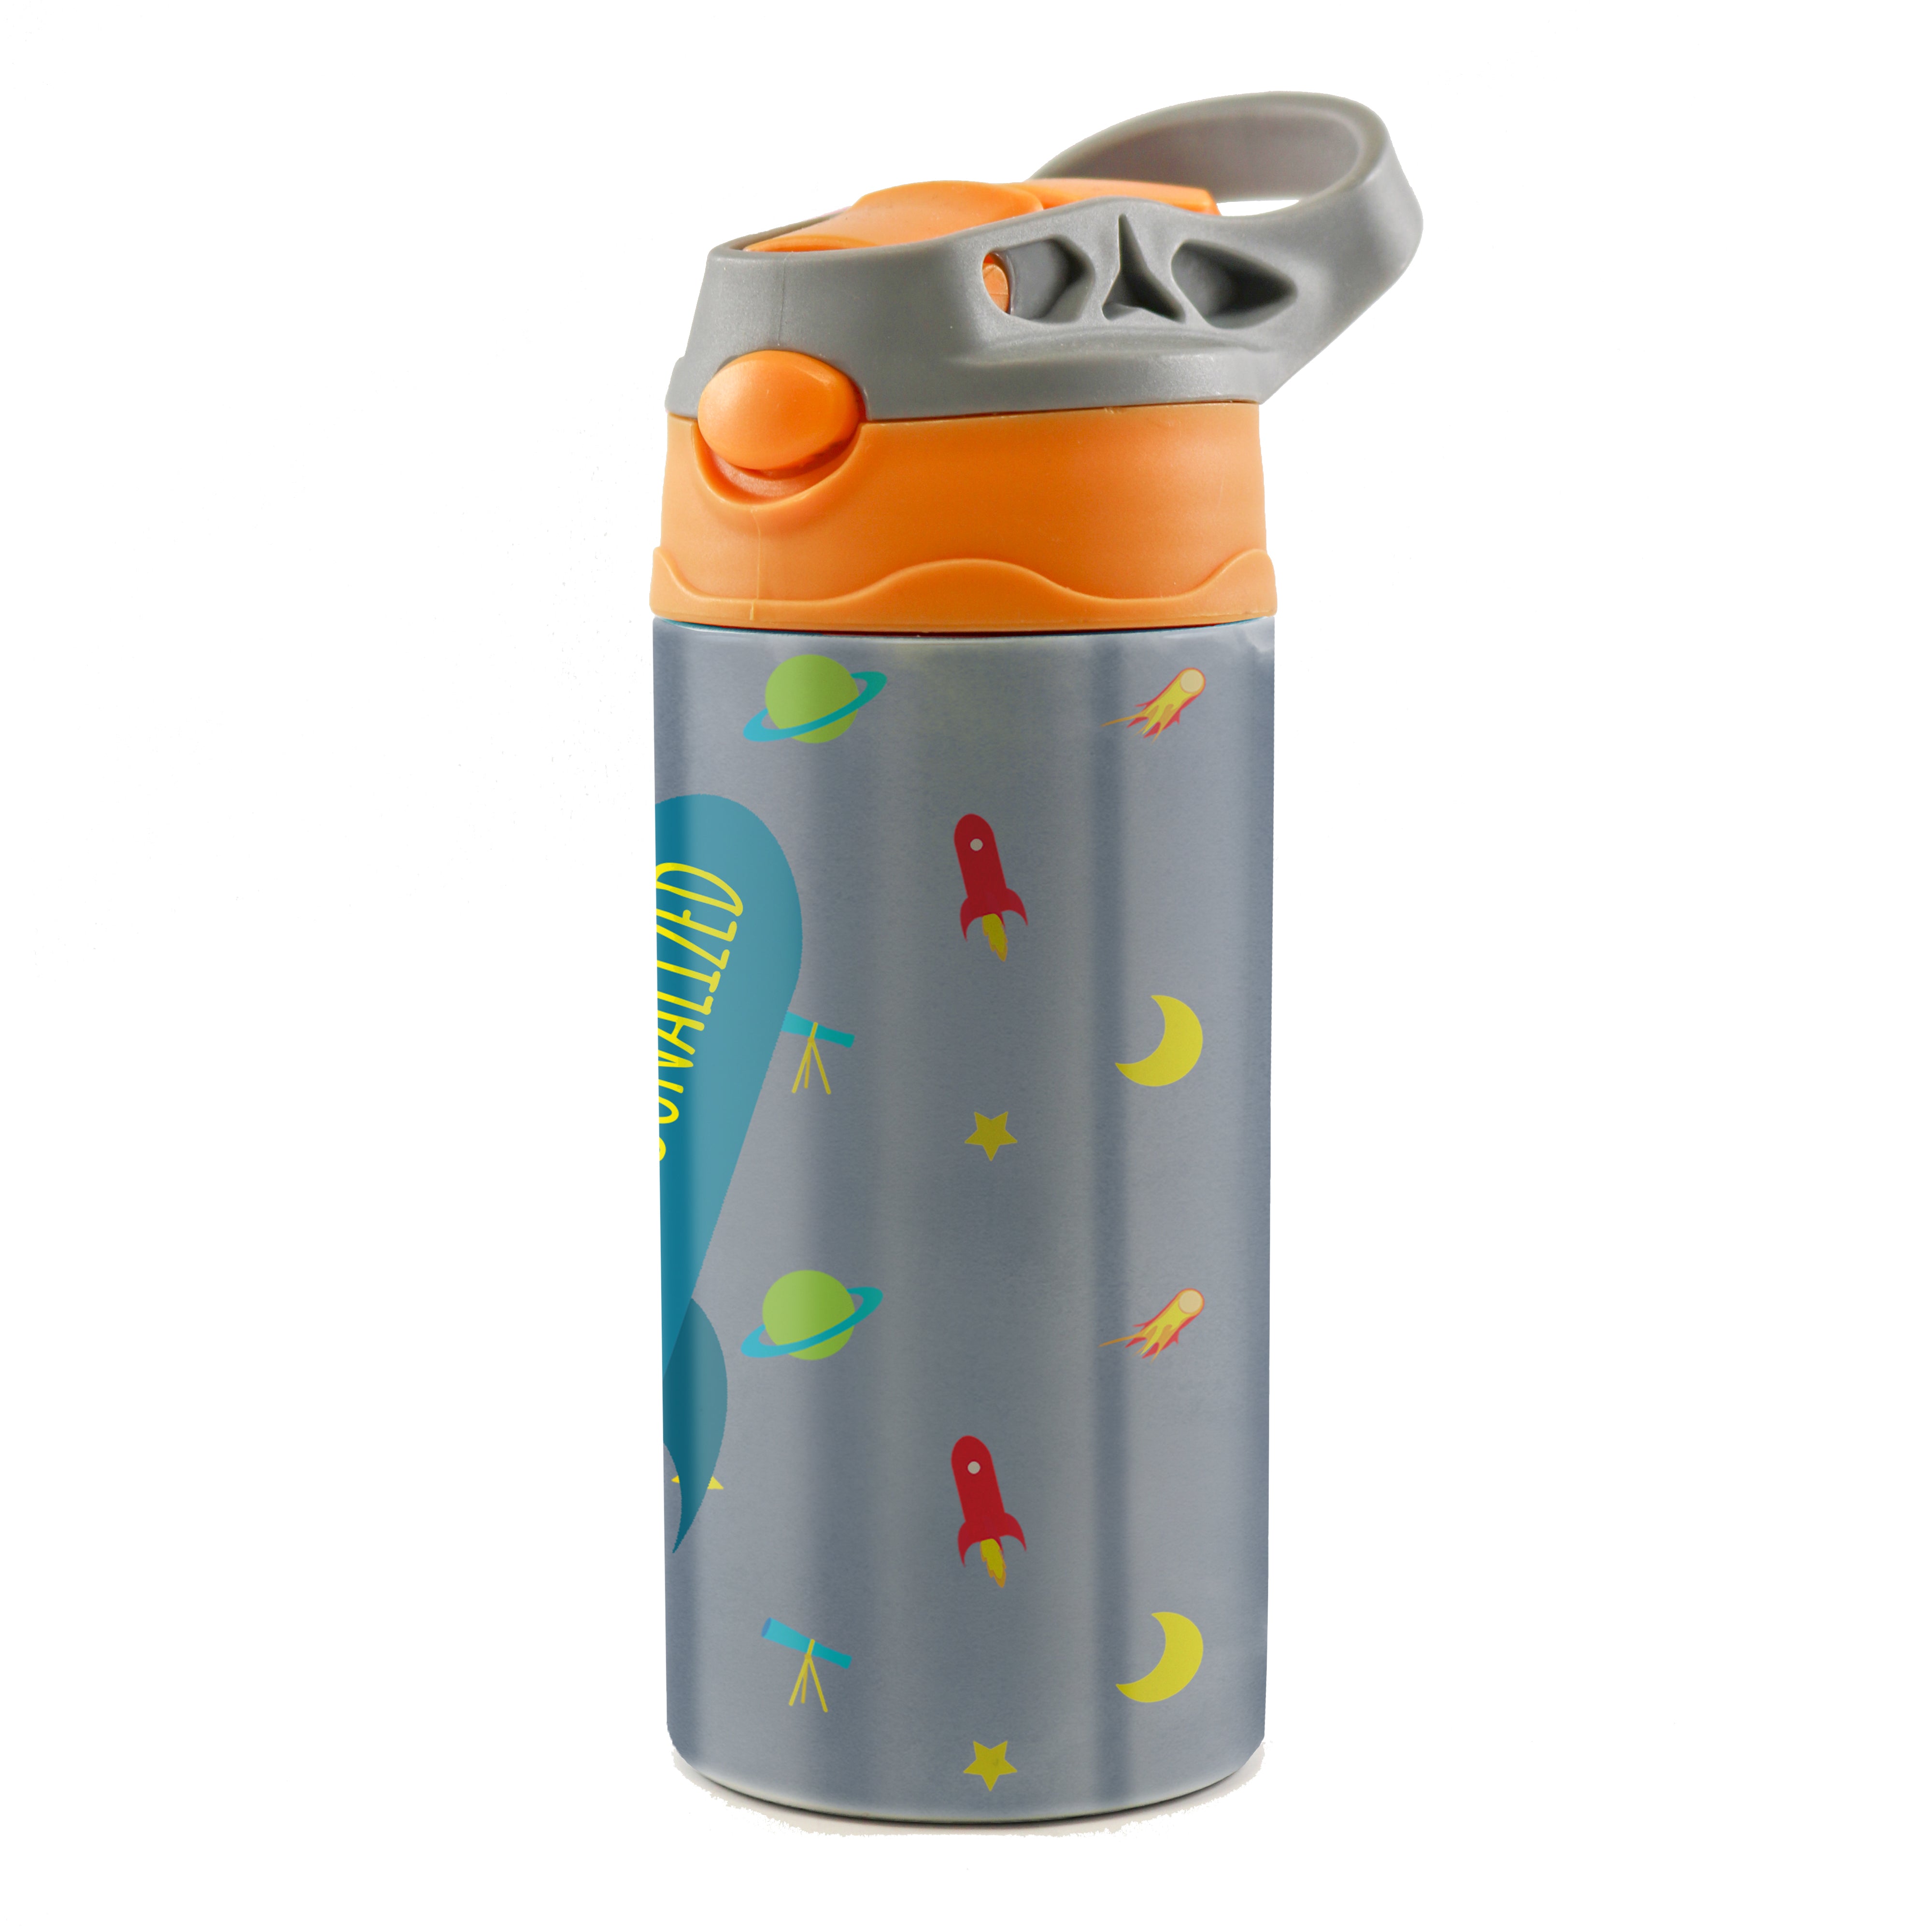 Trend Setters Original (Outer Space - Personalize with Name) 12 oz Stainless Steel Water Bottle with Orange and Grey Lid